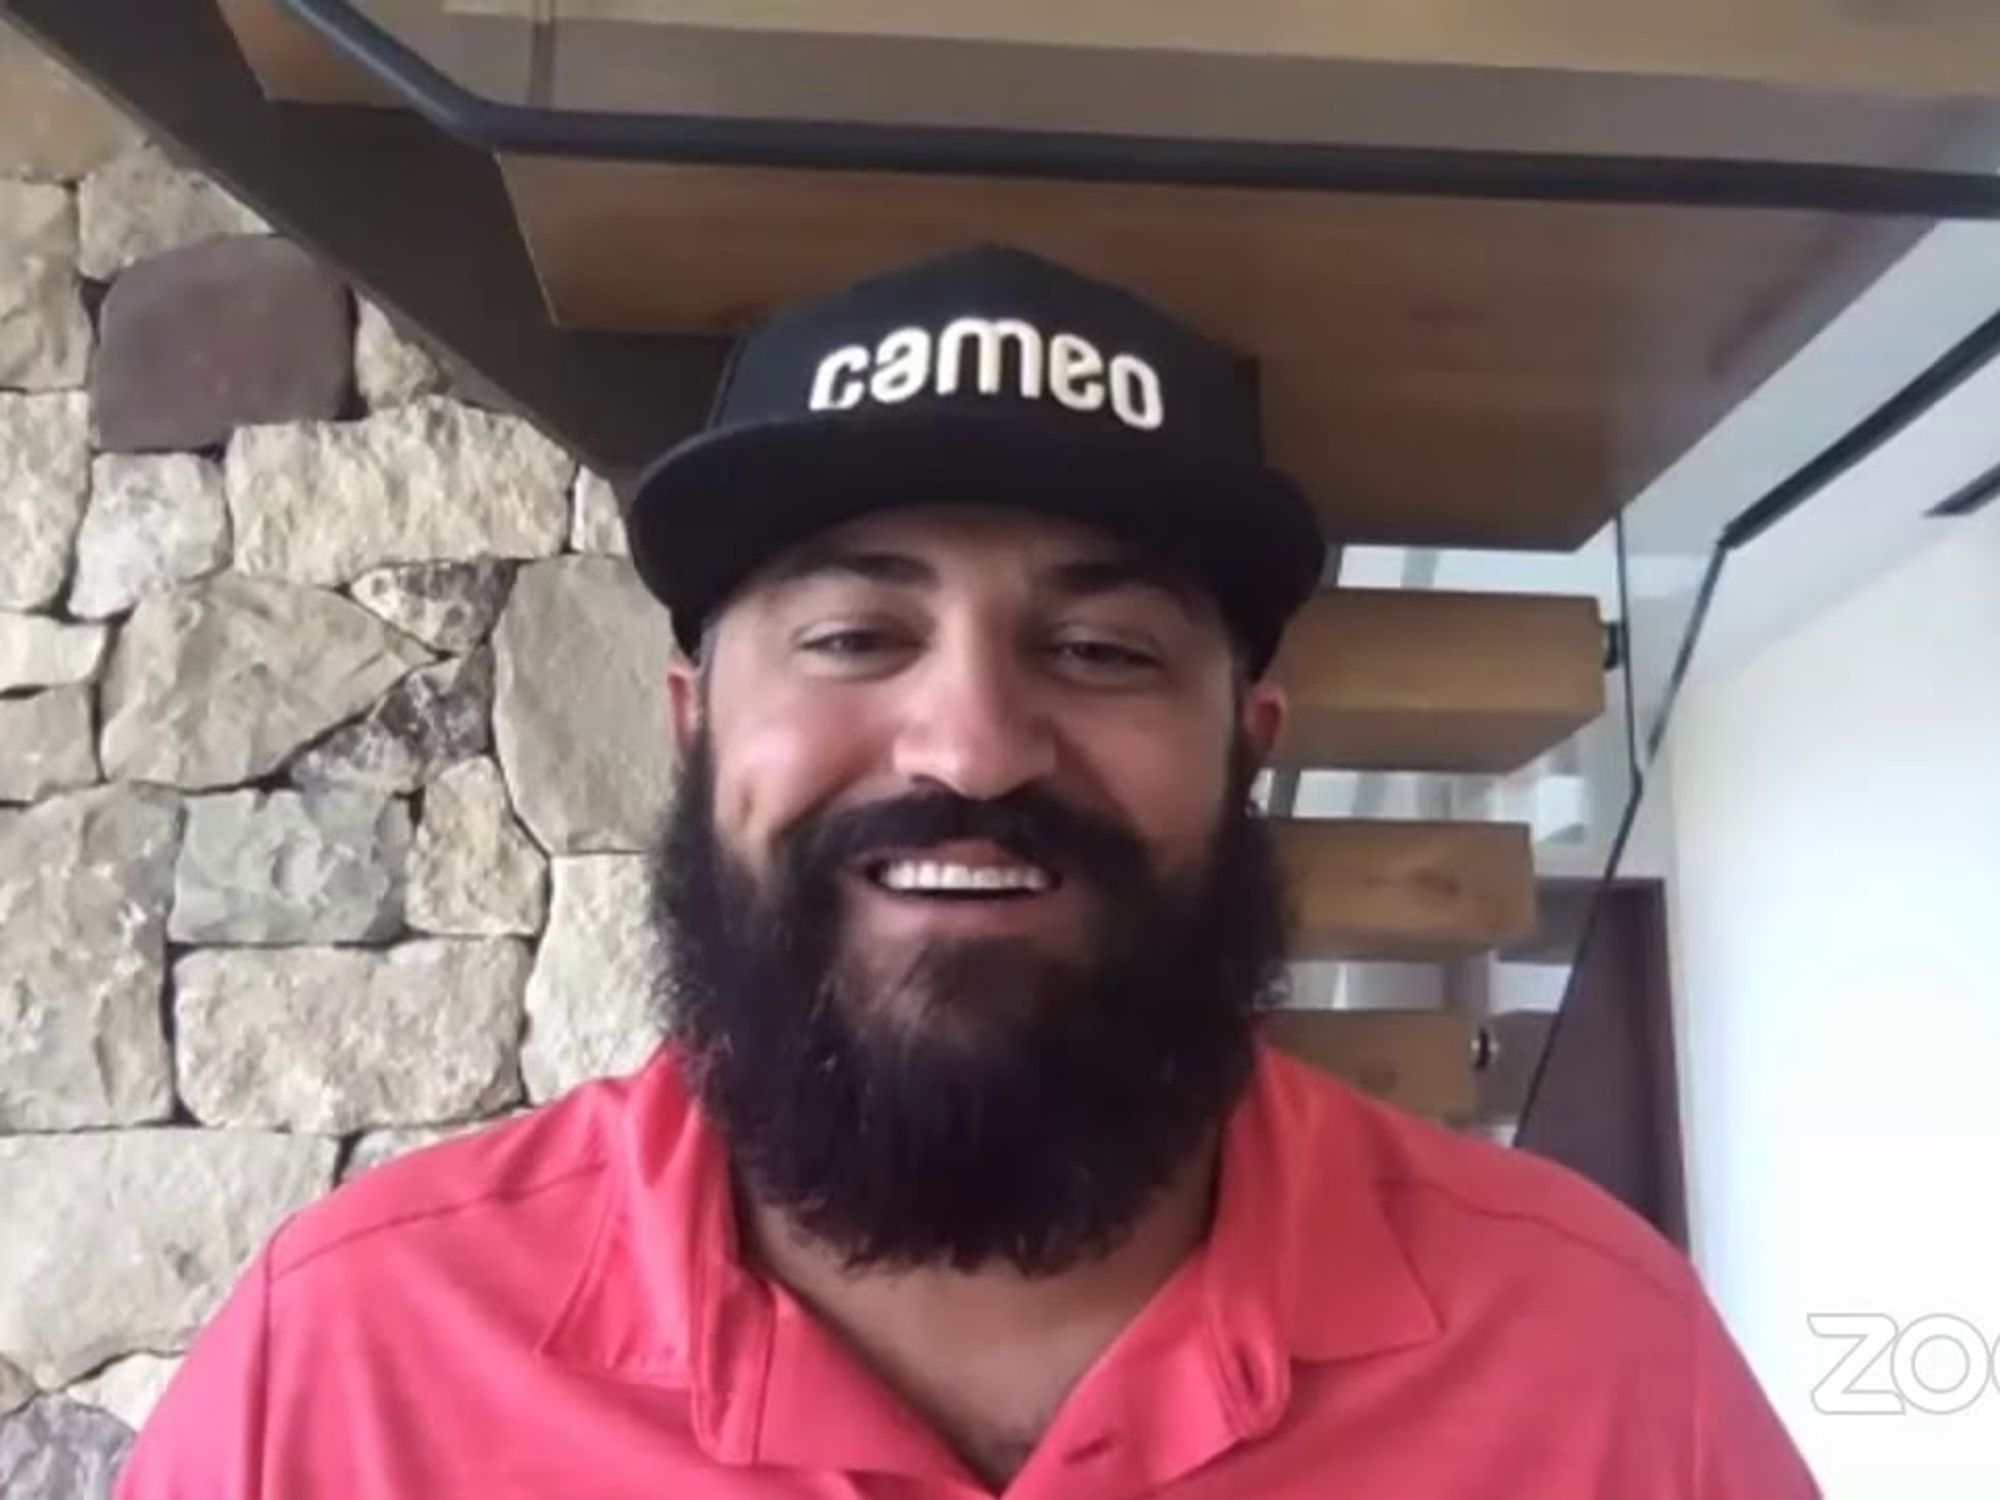 Watch: Our Virtual Fireside Chat with Cameo Founder and CEO Steven Galanis